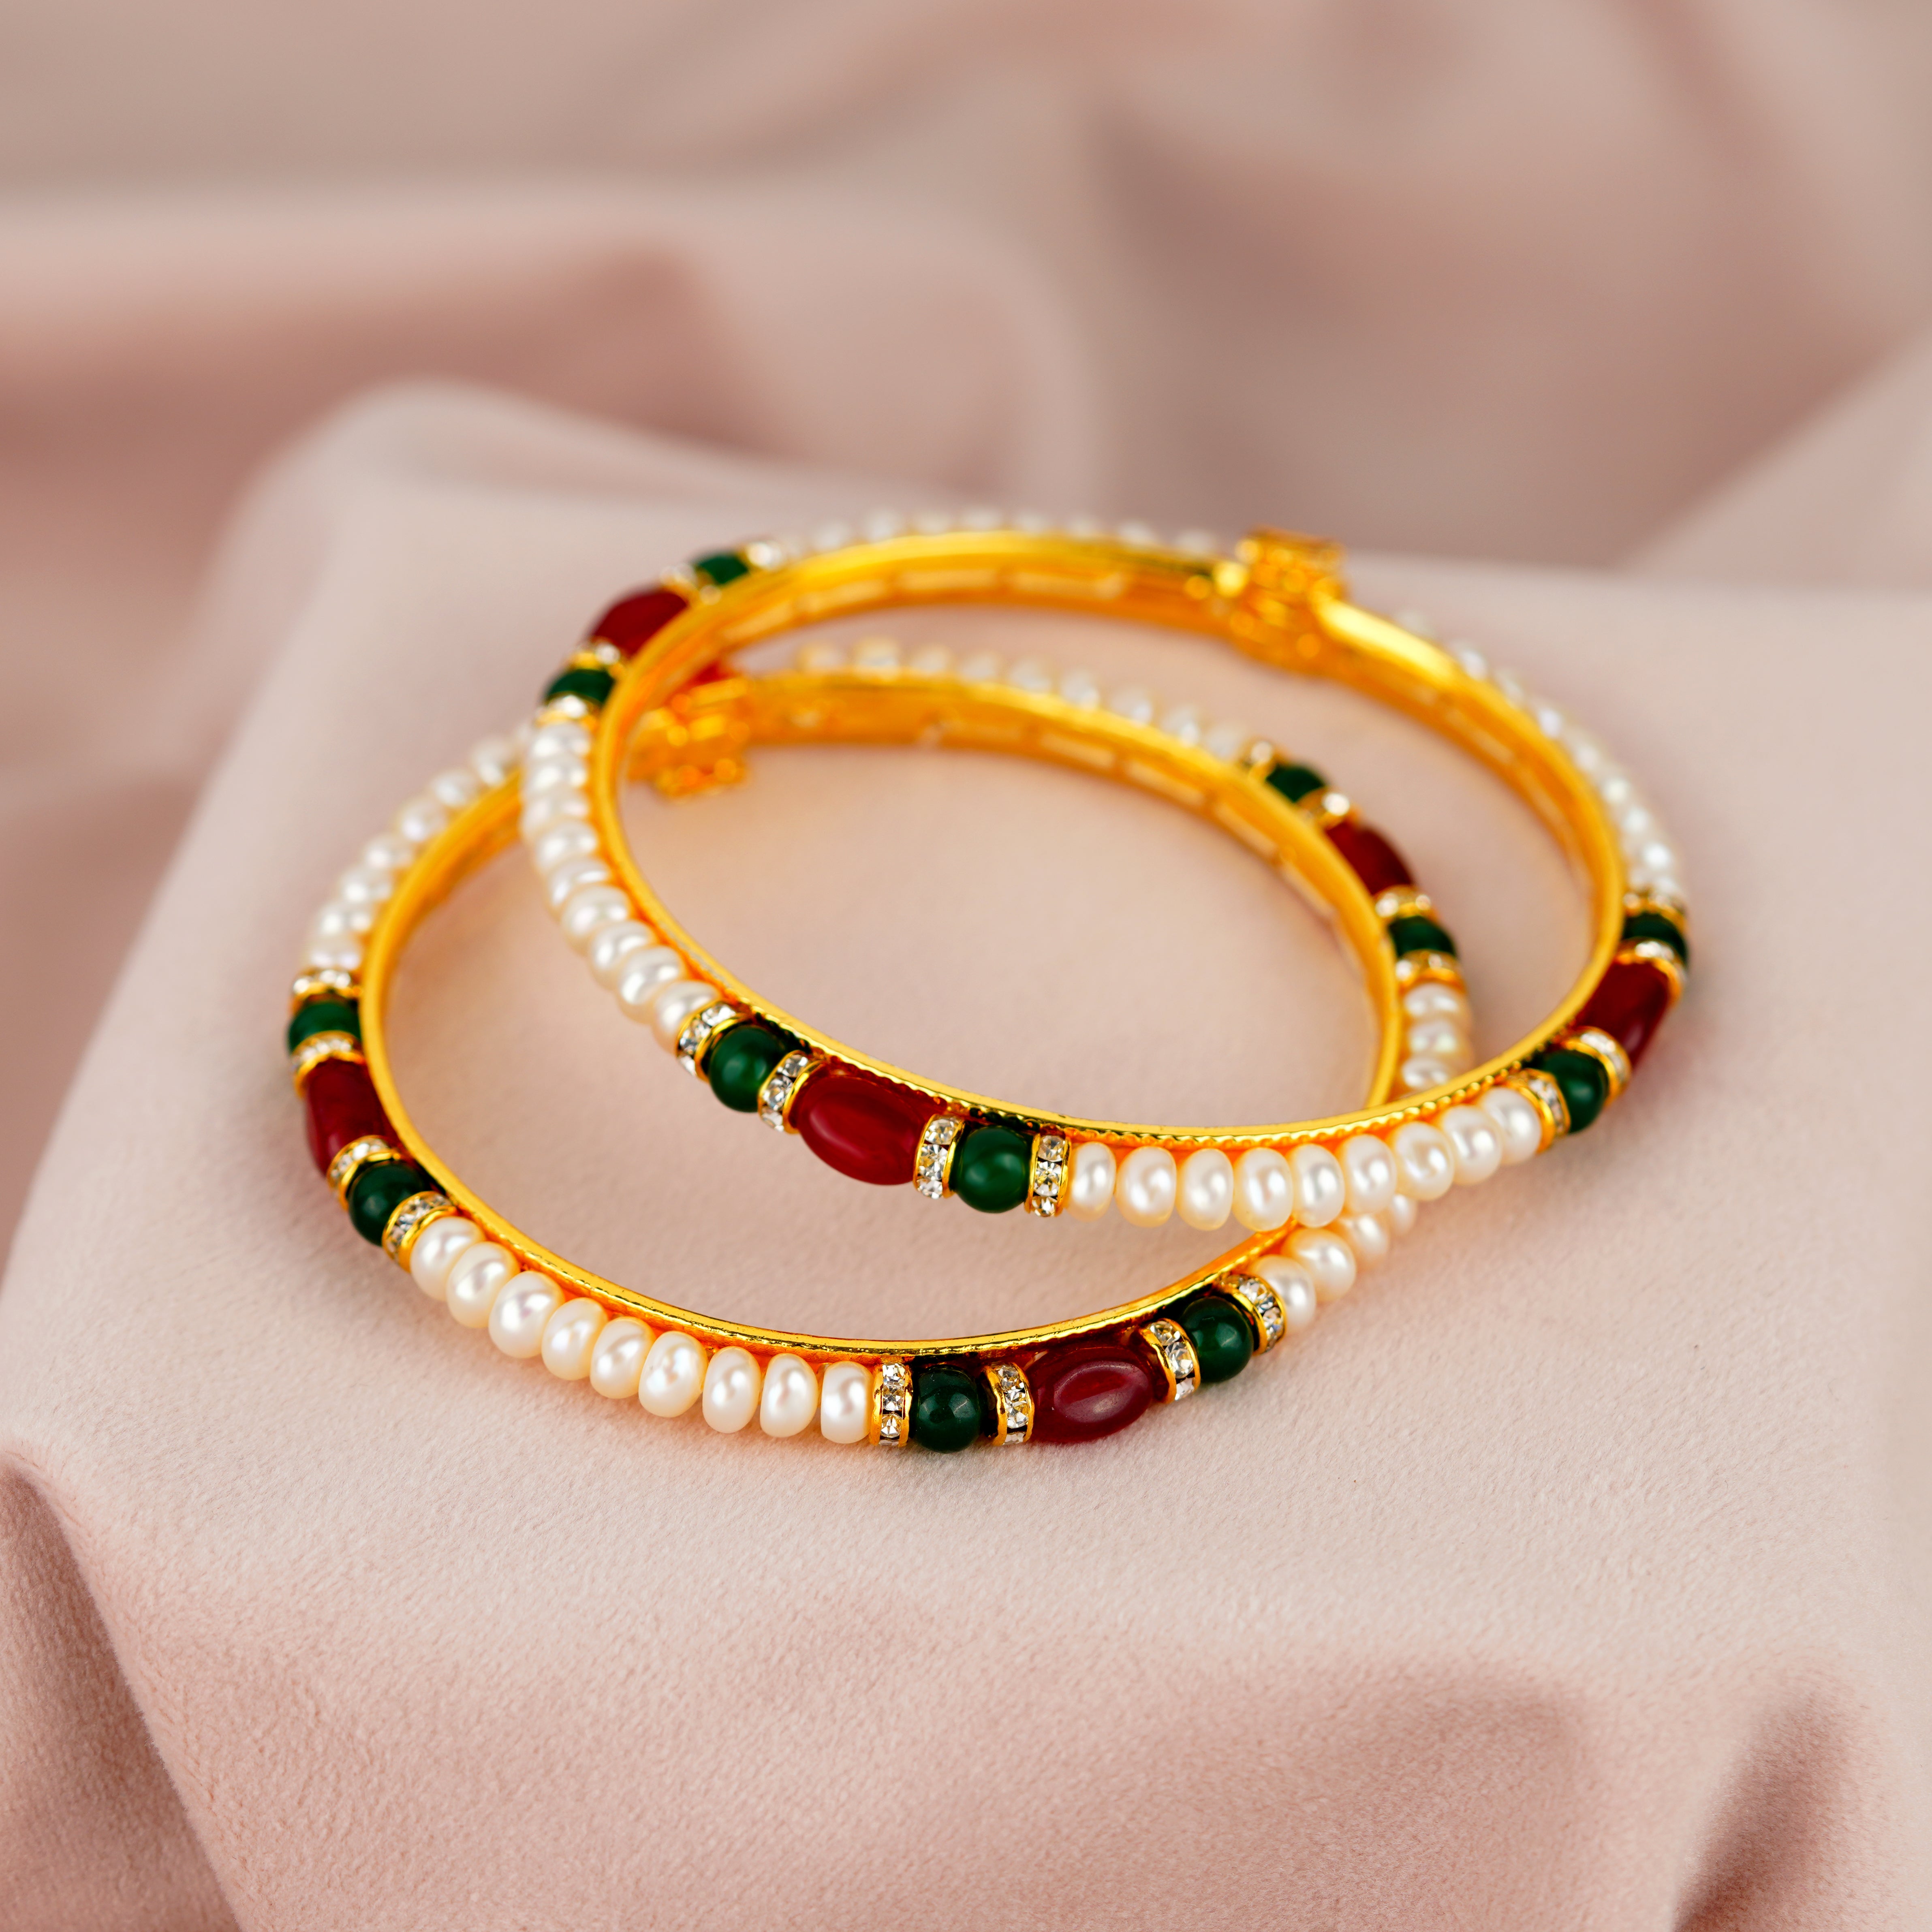 Pearl Bangles set with colored stones and czs